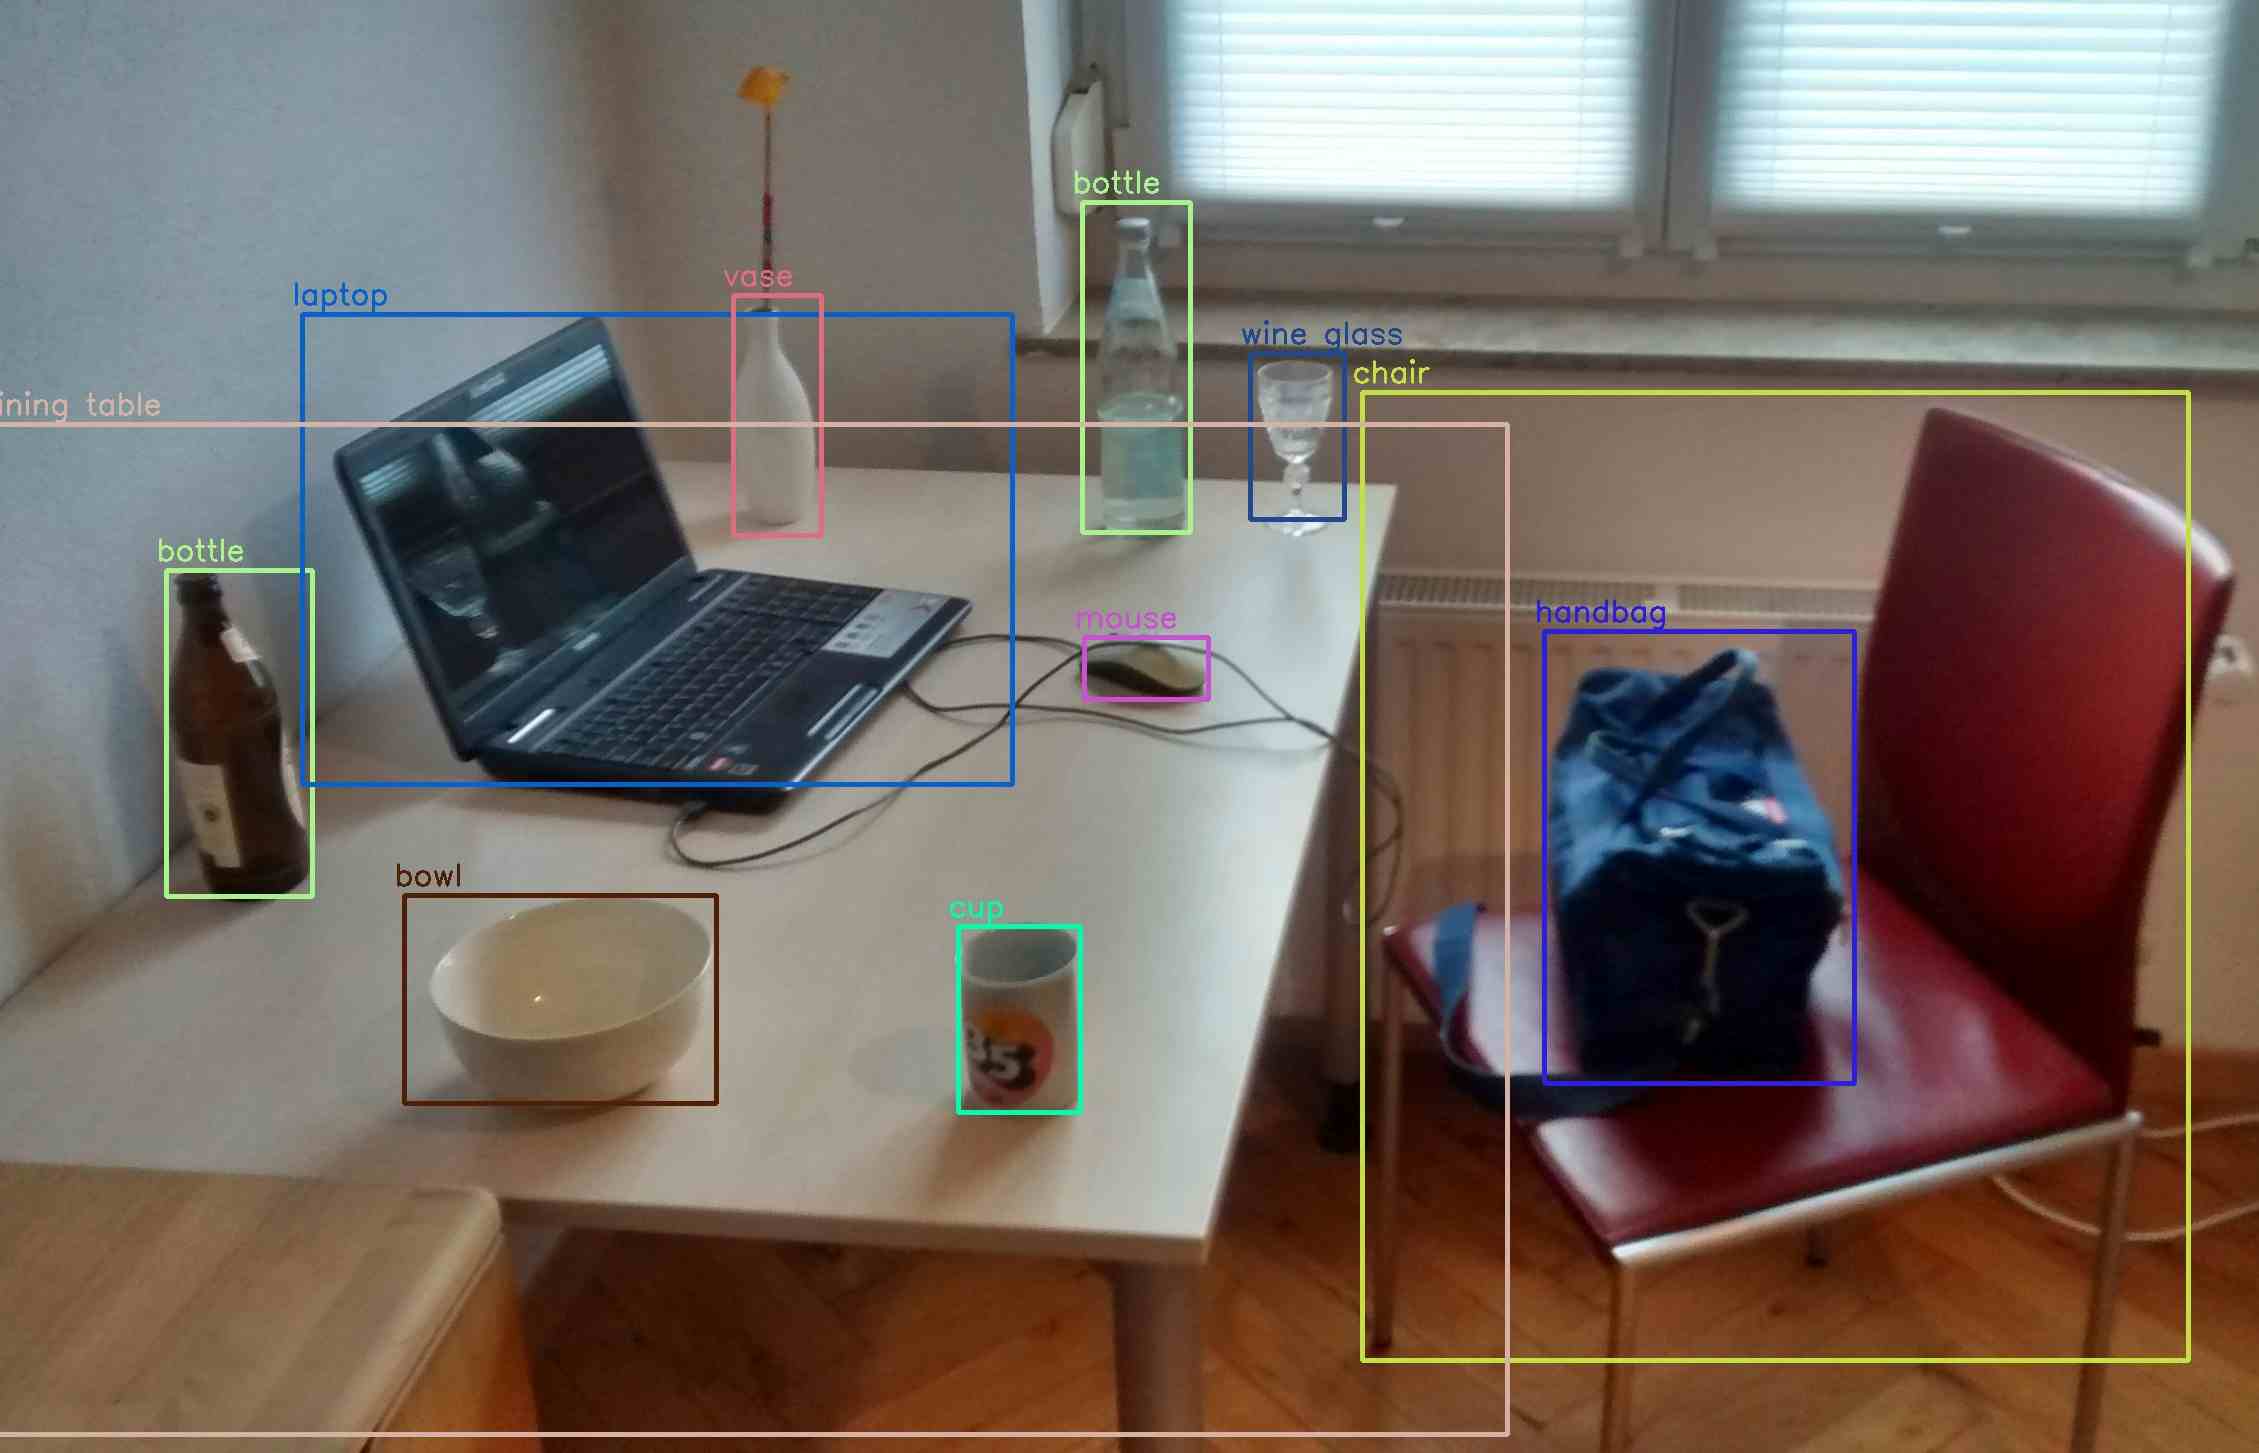 Object-Detection